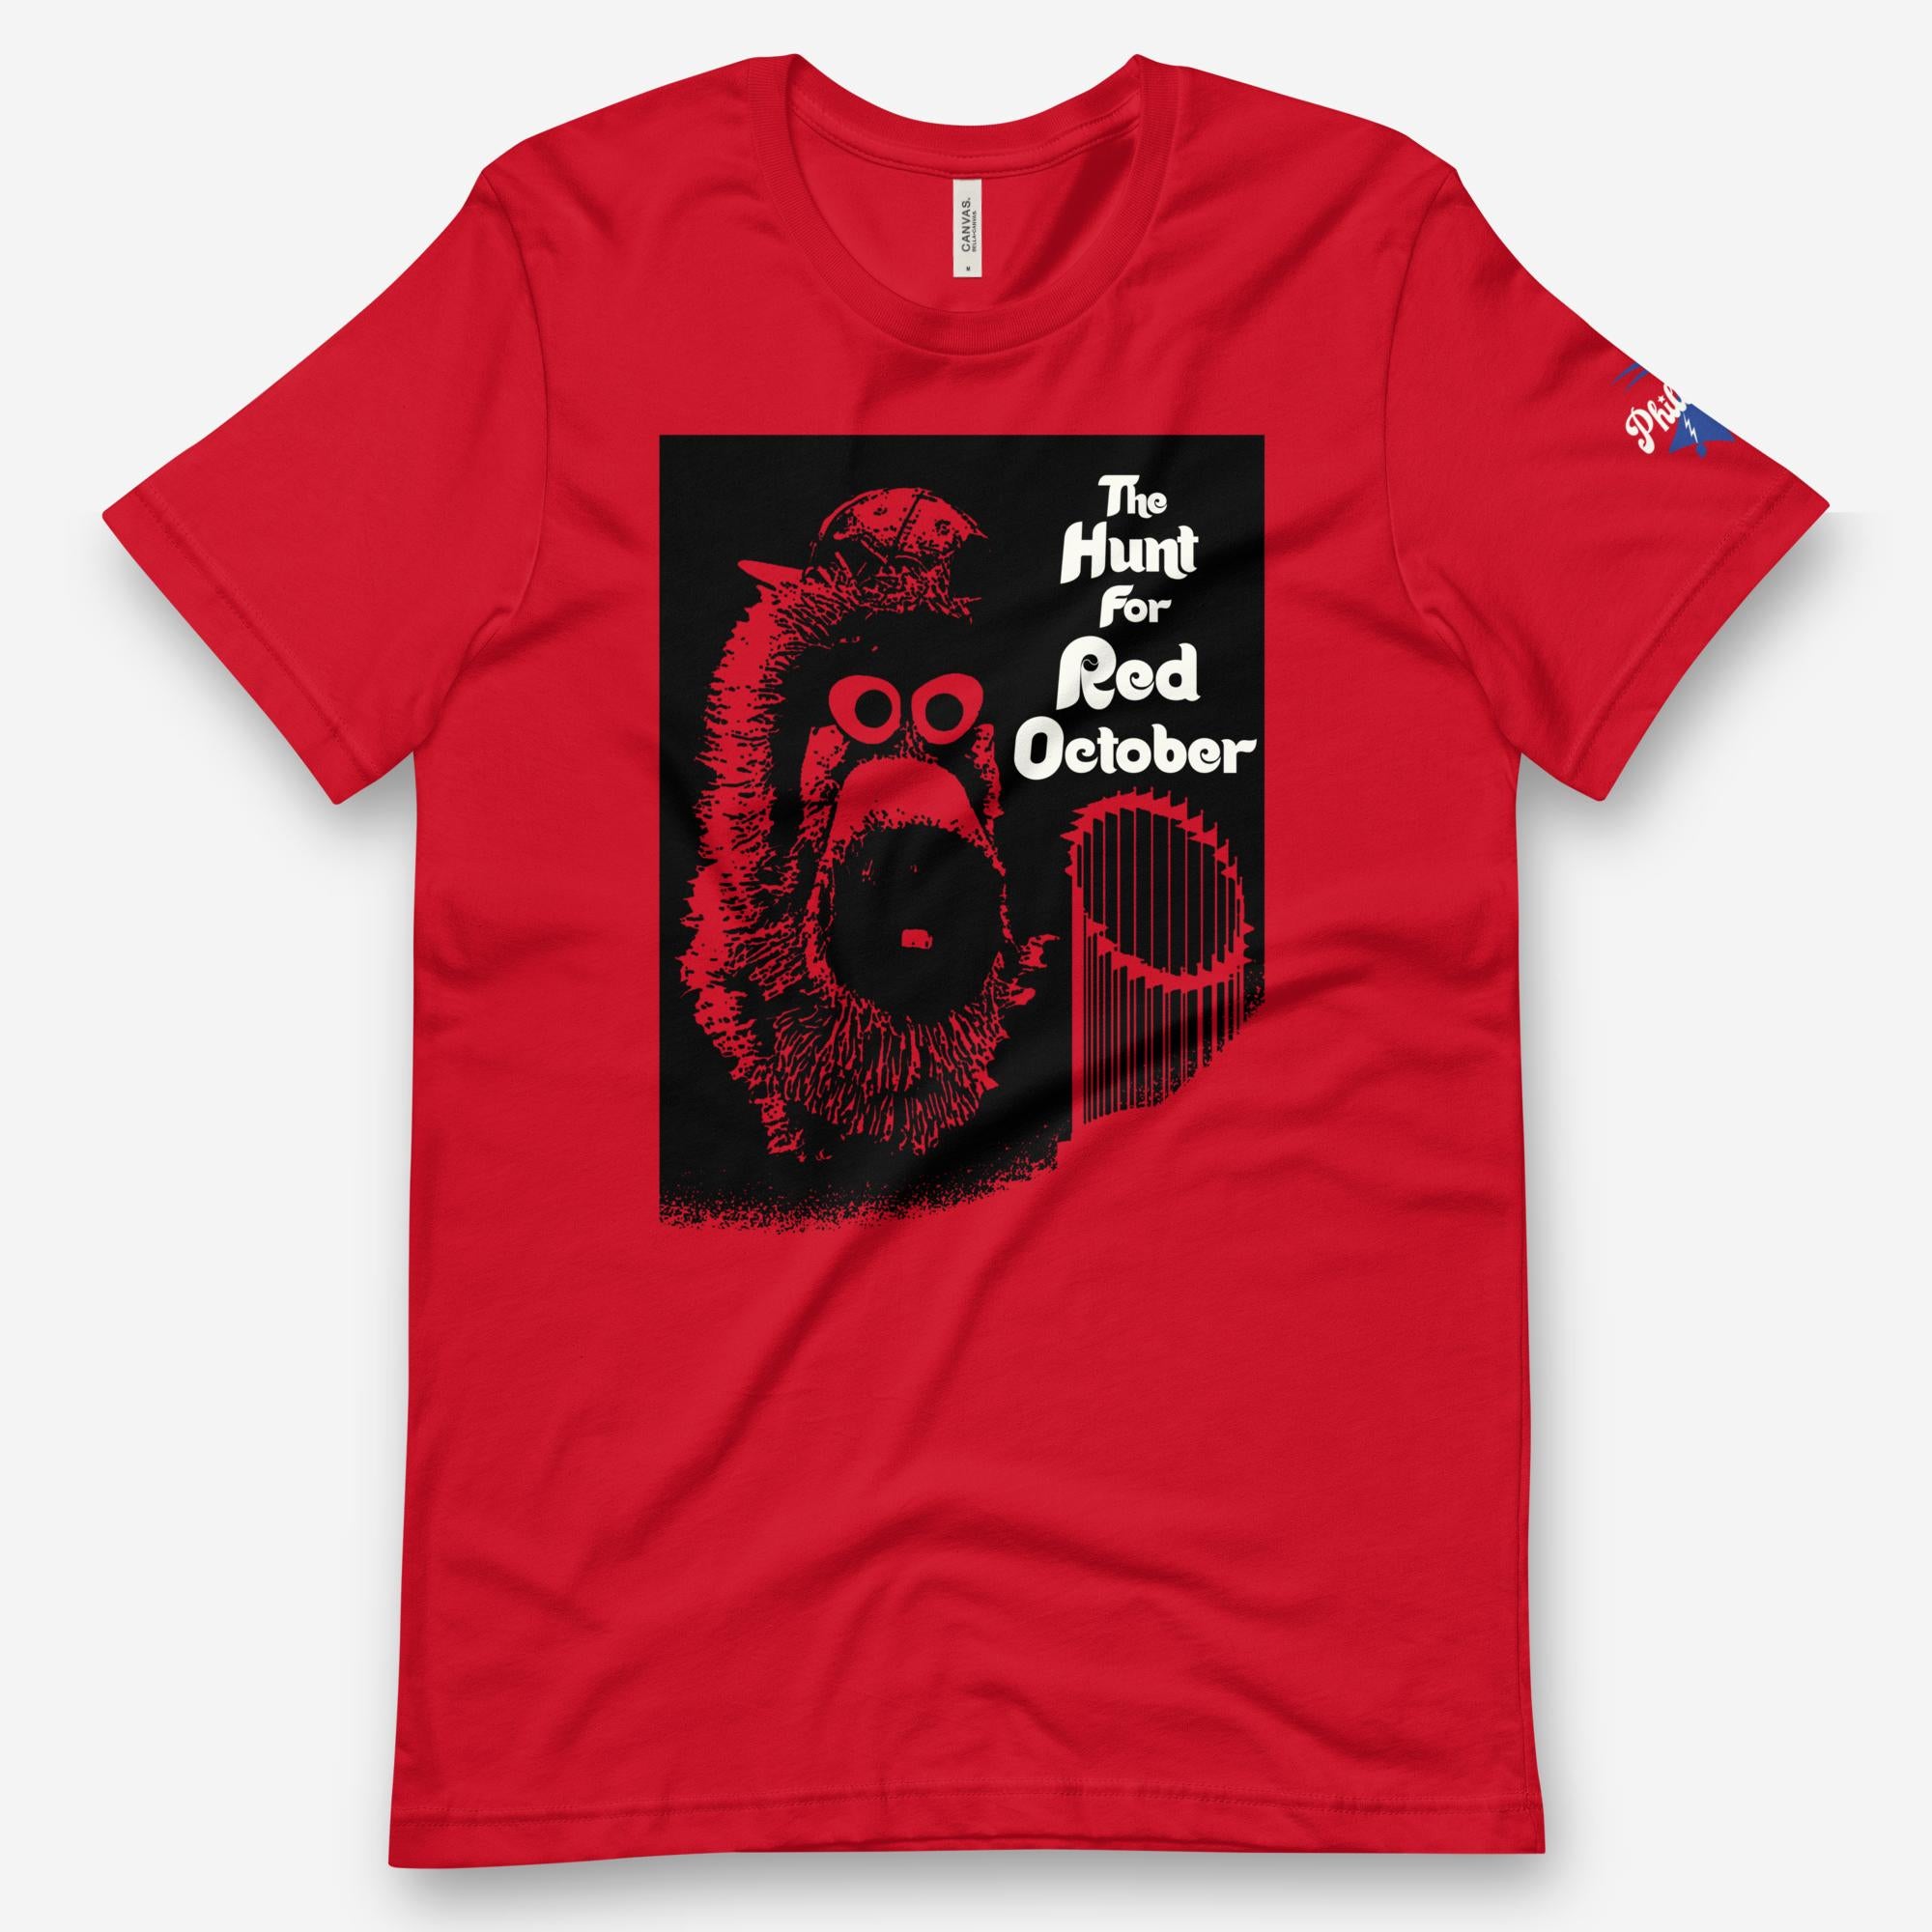 "The Hunt for Red October" Tee